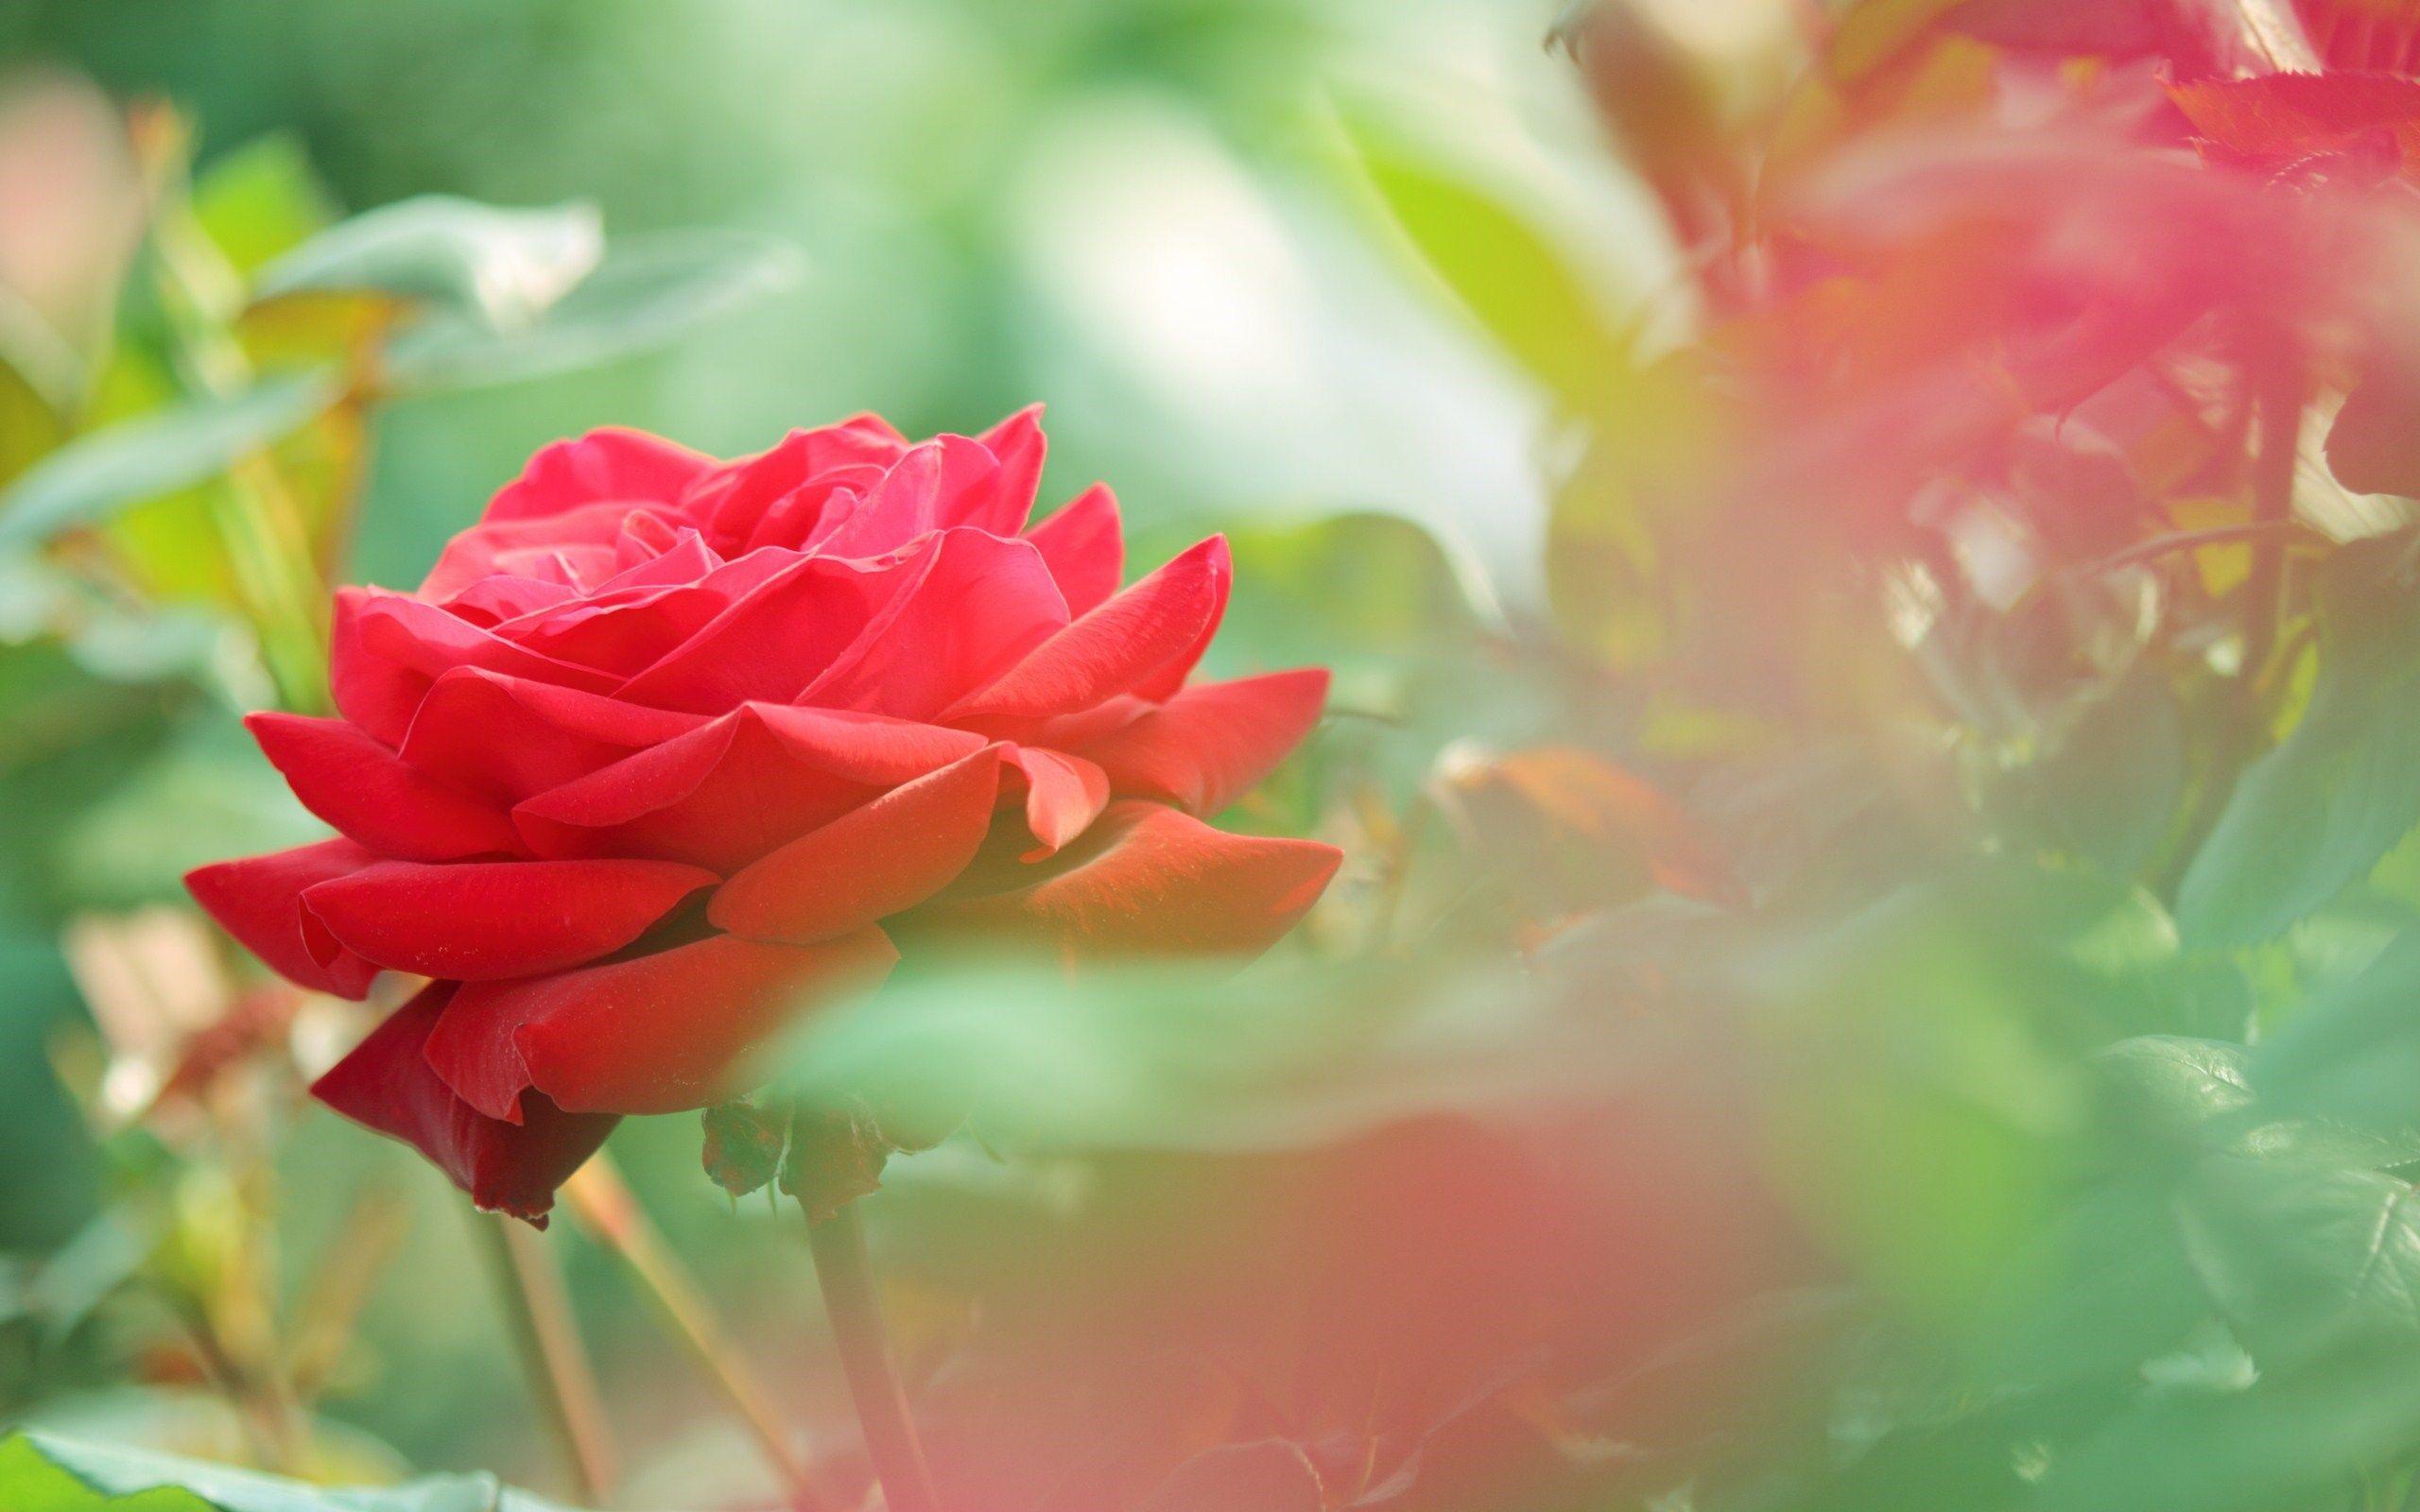 beautiful rose flowers image and wallpaper Download